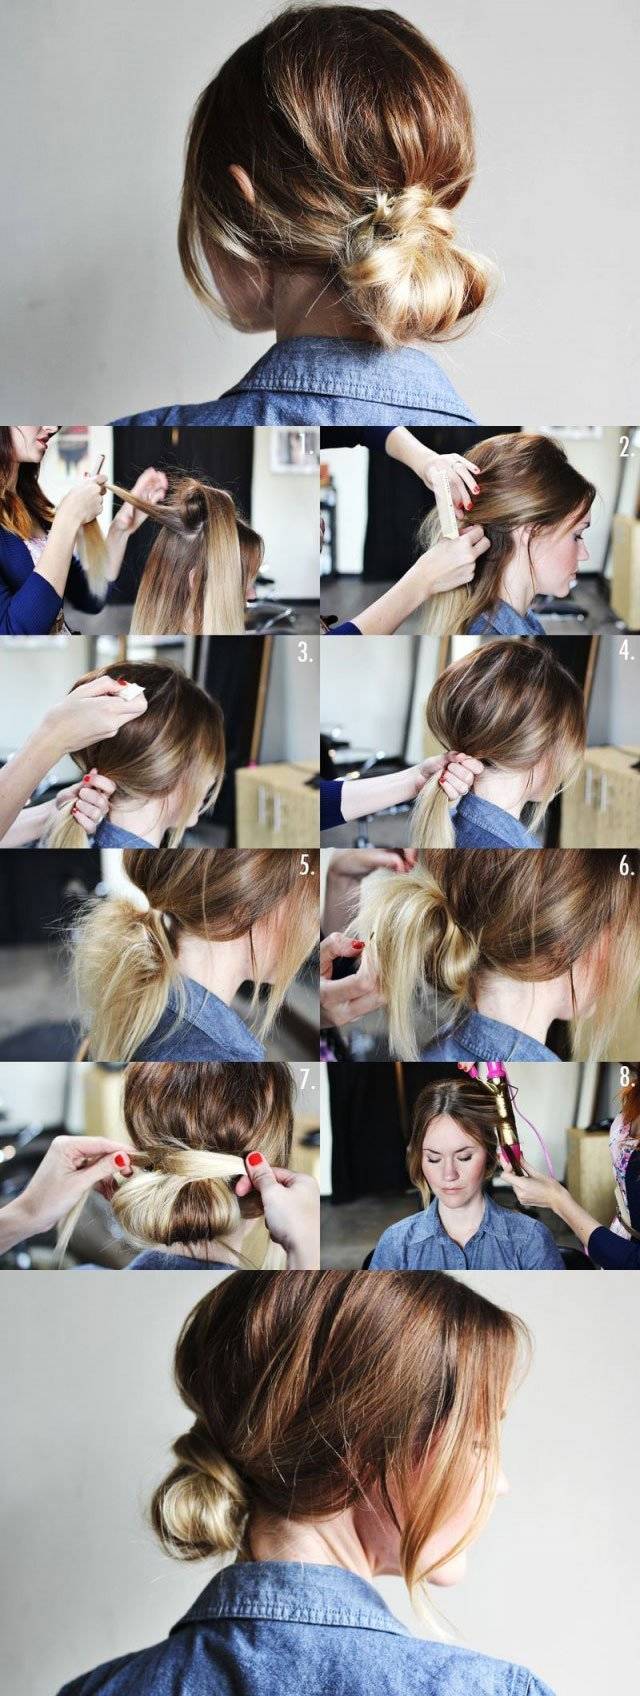 https://image.sistacafe.com/images/uploads/content_image/image/34966/1441908078-HOW-TO-STYLE-A-LOW-BUN.jpg